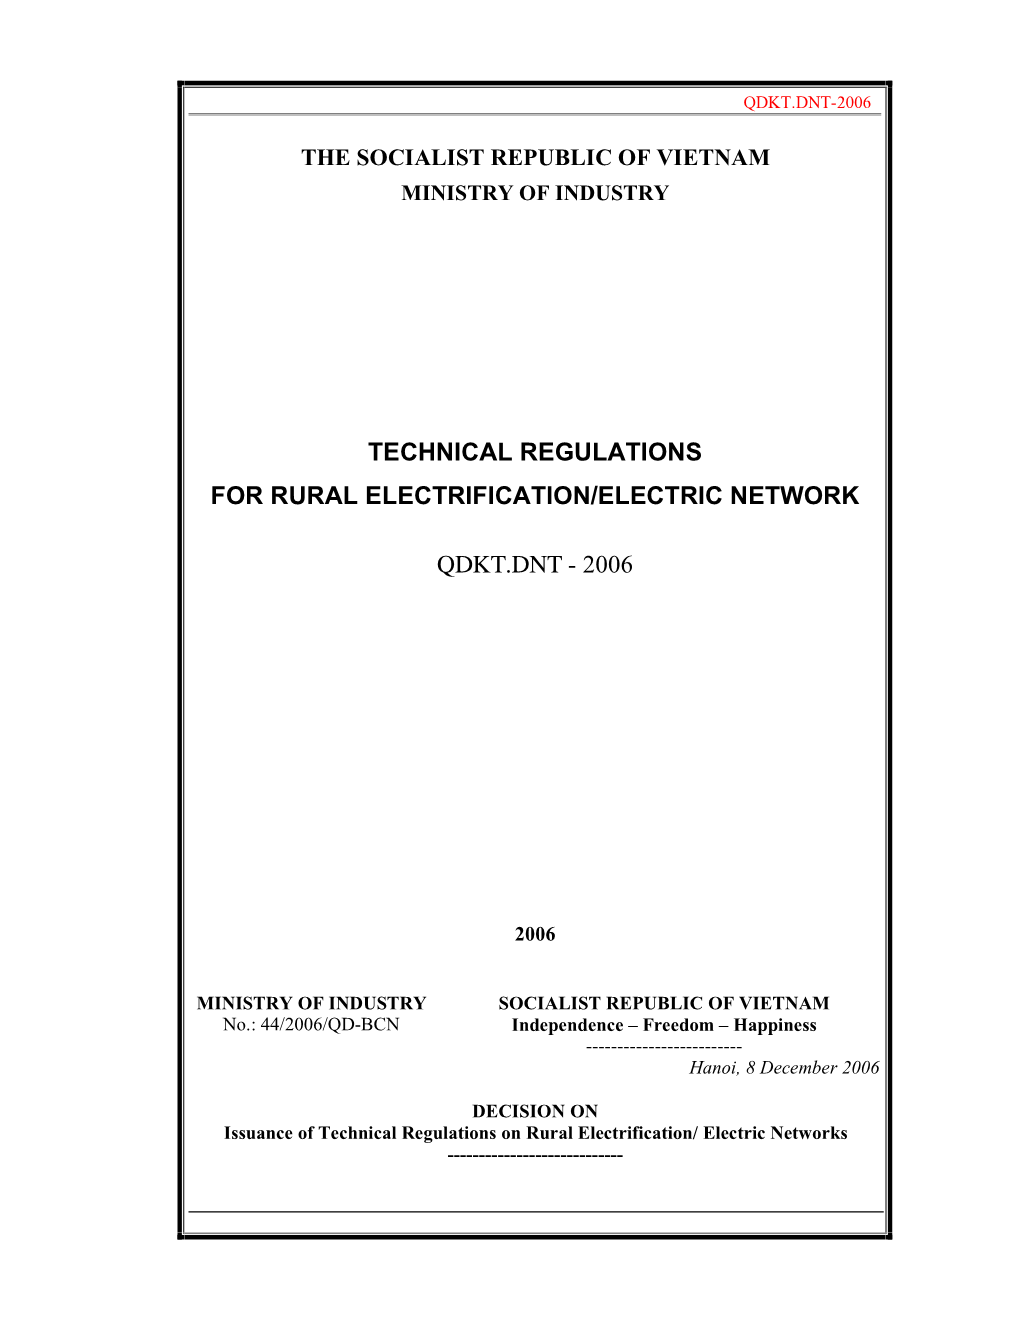 Technical Regulations for Rural Electrification/Electric Network